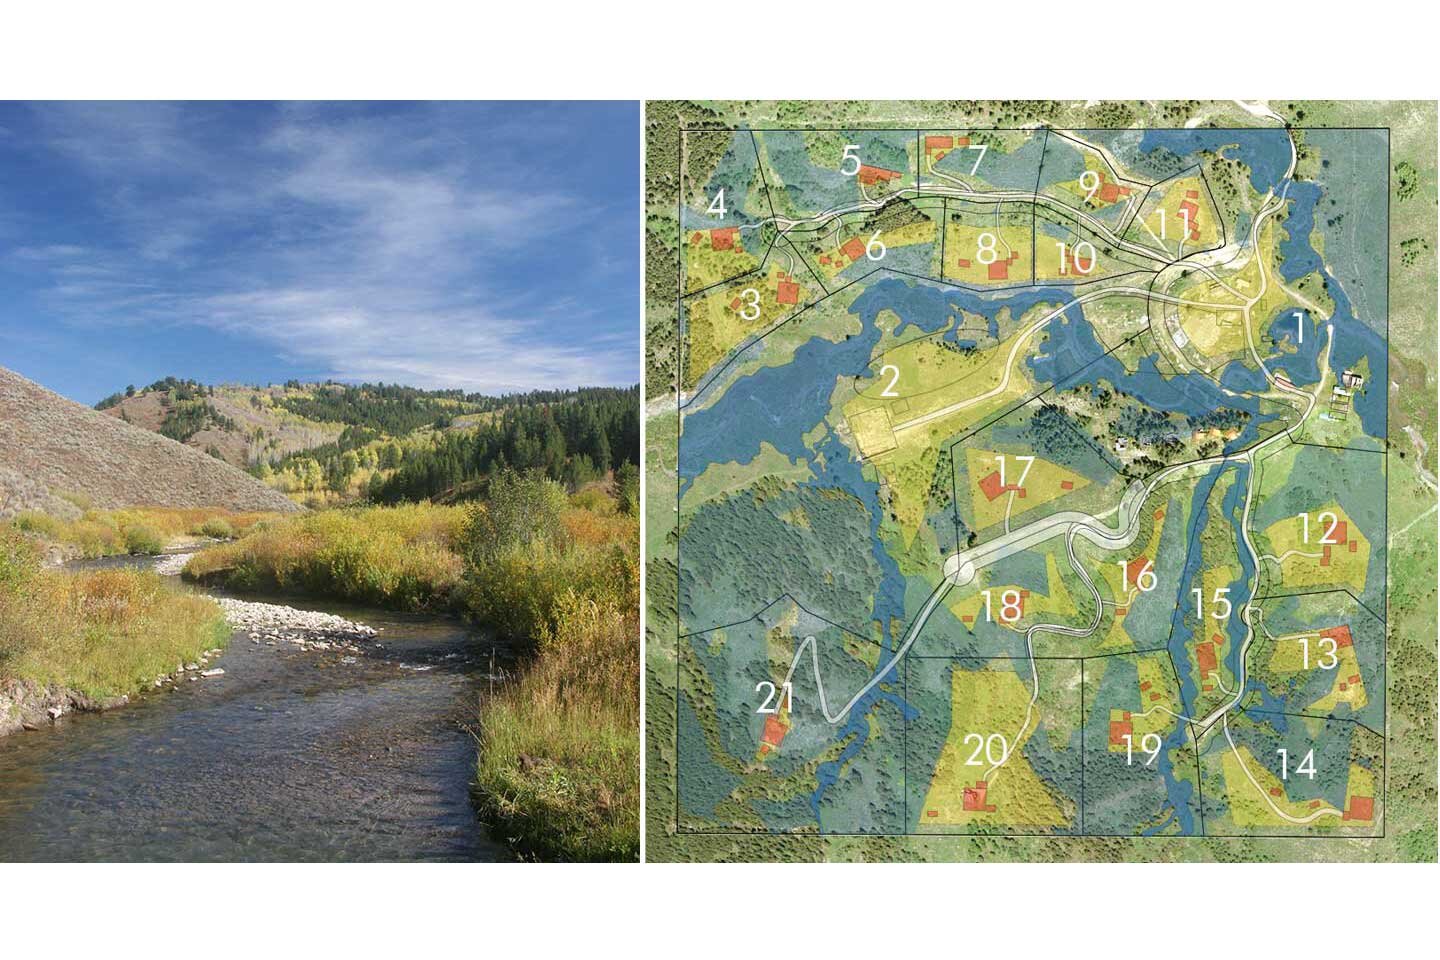 View of site with wild creek and site plan